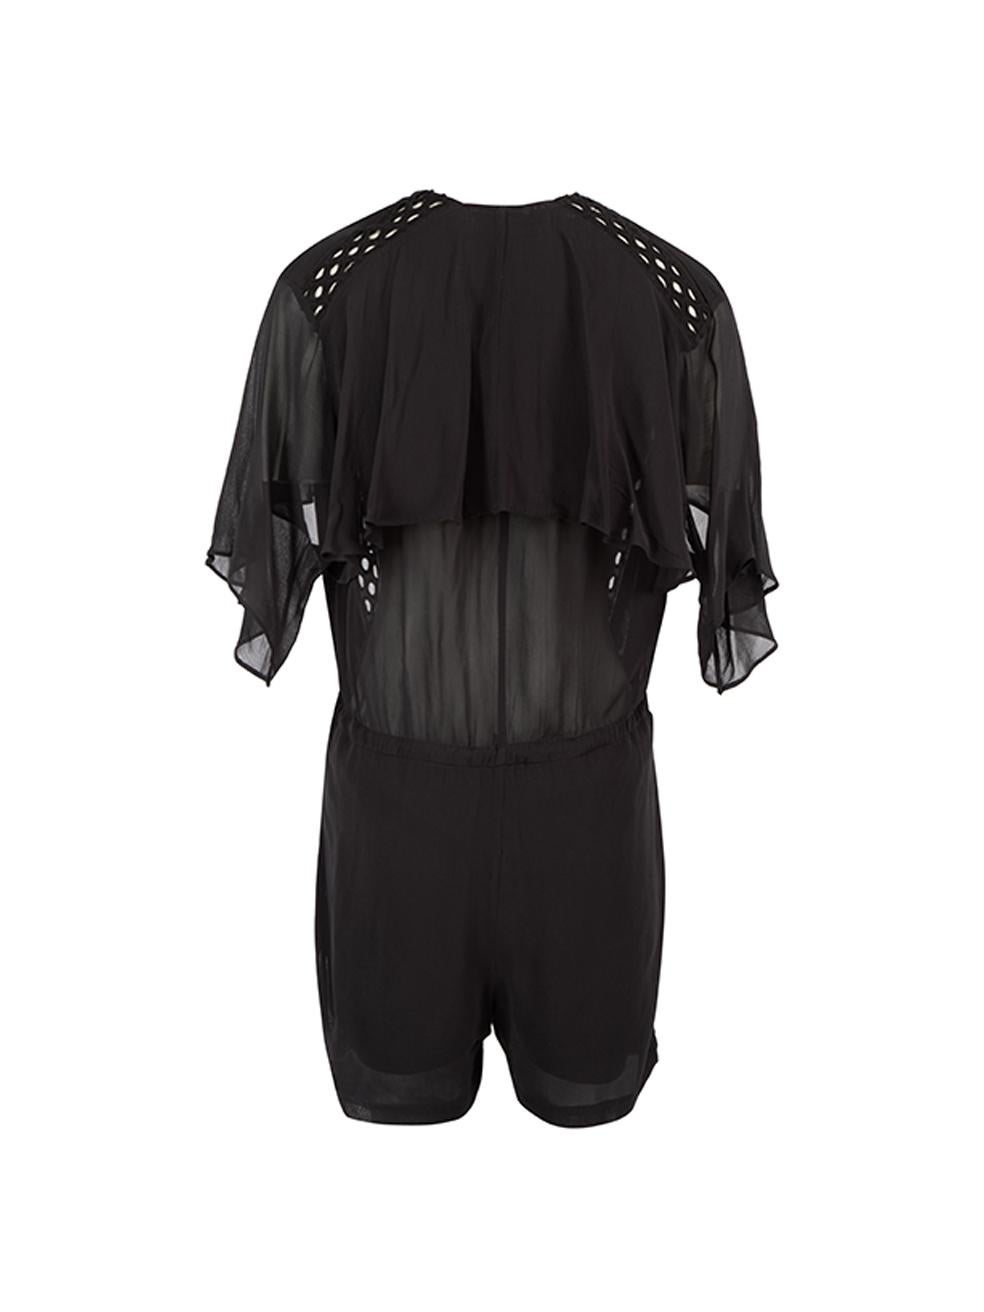 CONDITION is Very good. Minimal wear to dress is evident. Minimal wear to the fabric of the cutout accents on this used Iro designer resale item. Details Black Viscose Jumpsuit Short sheer sleeves V neckline Wrap front design Cut out lace trimmings